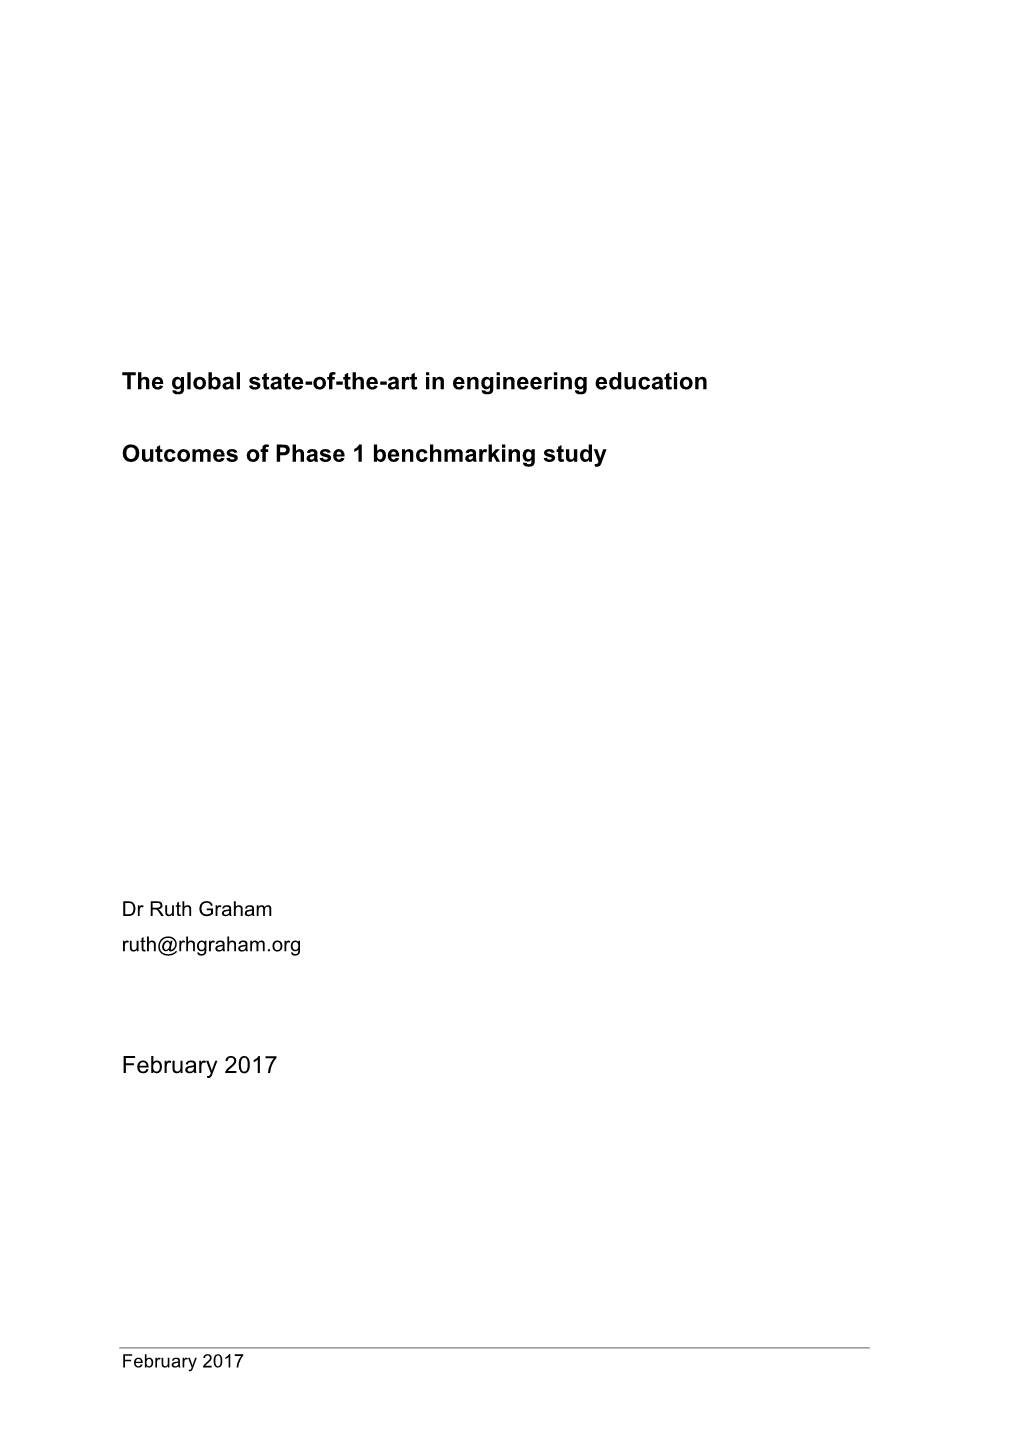 The Global State-Of-The-Art in Engineering Education